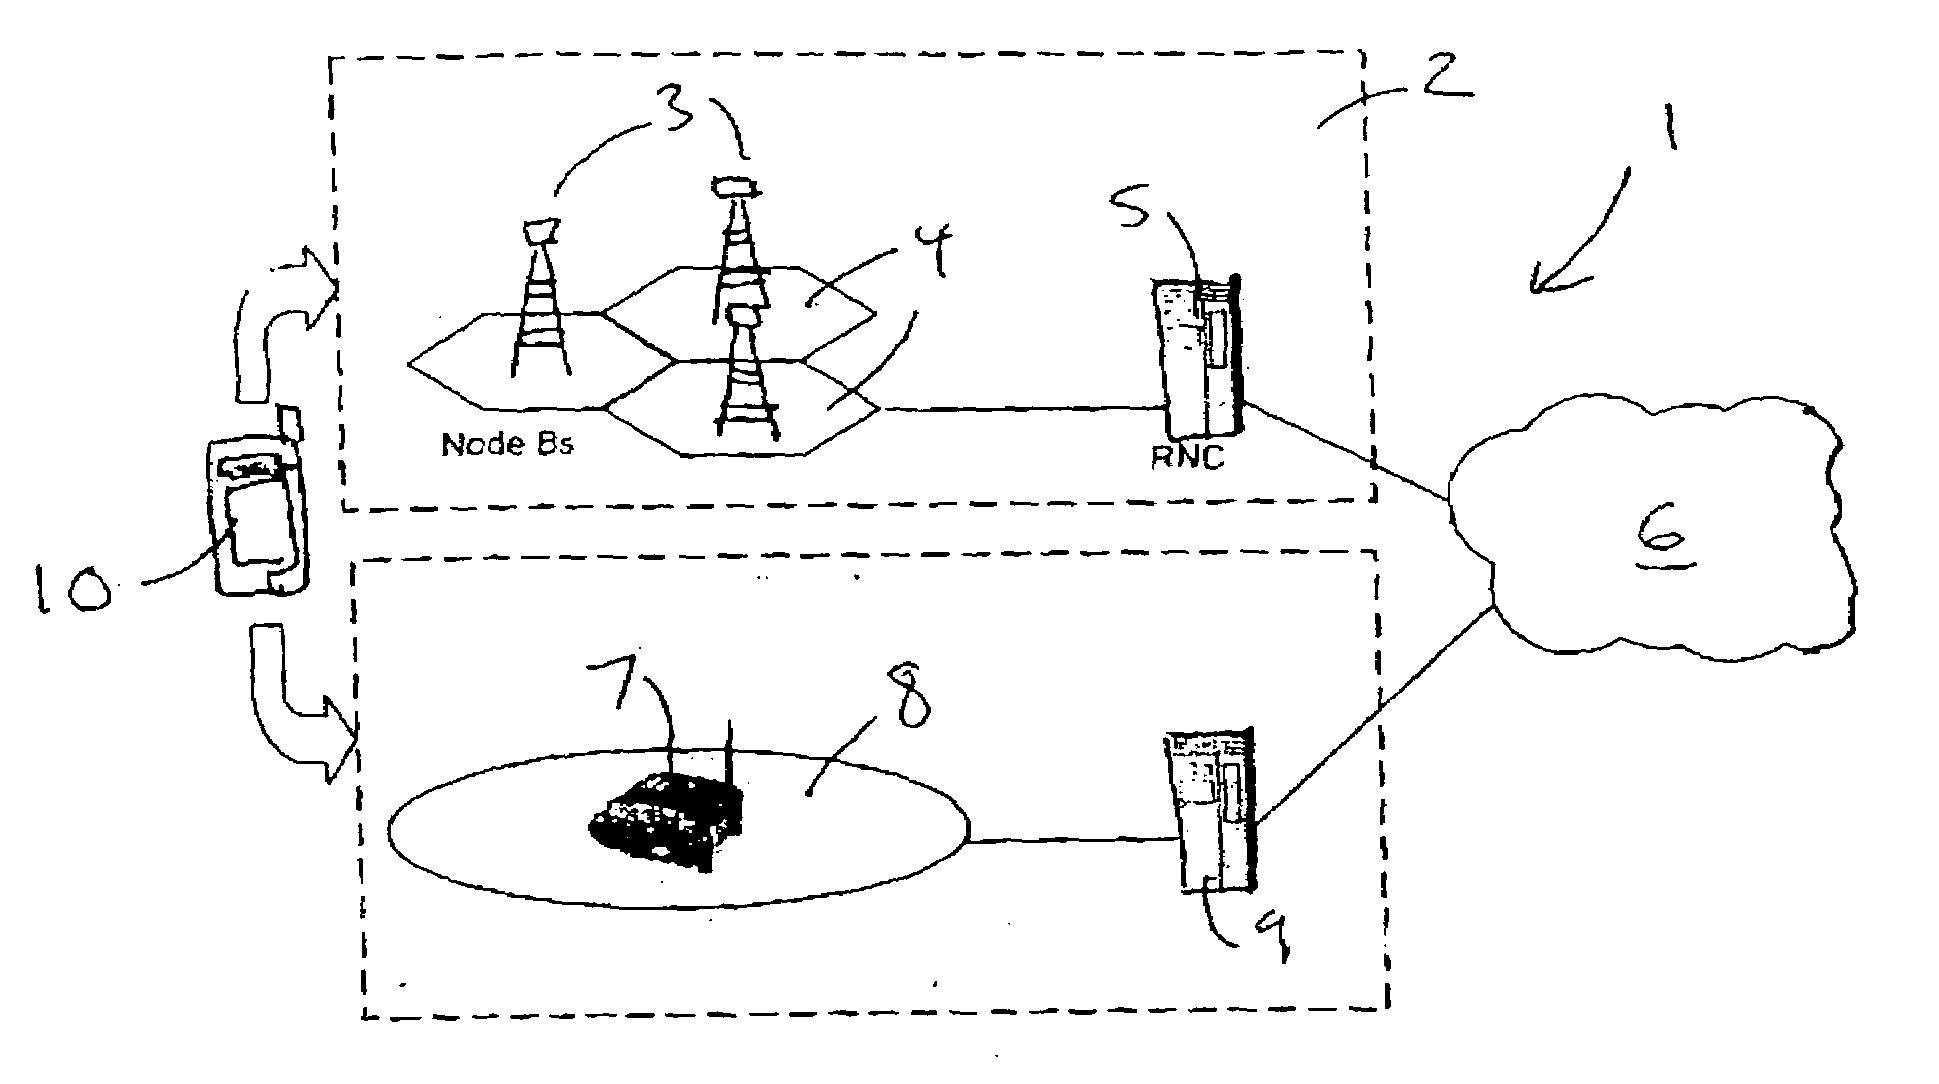 Method of administering call handover between cells in a communications system